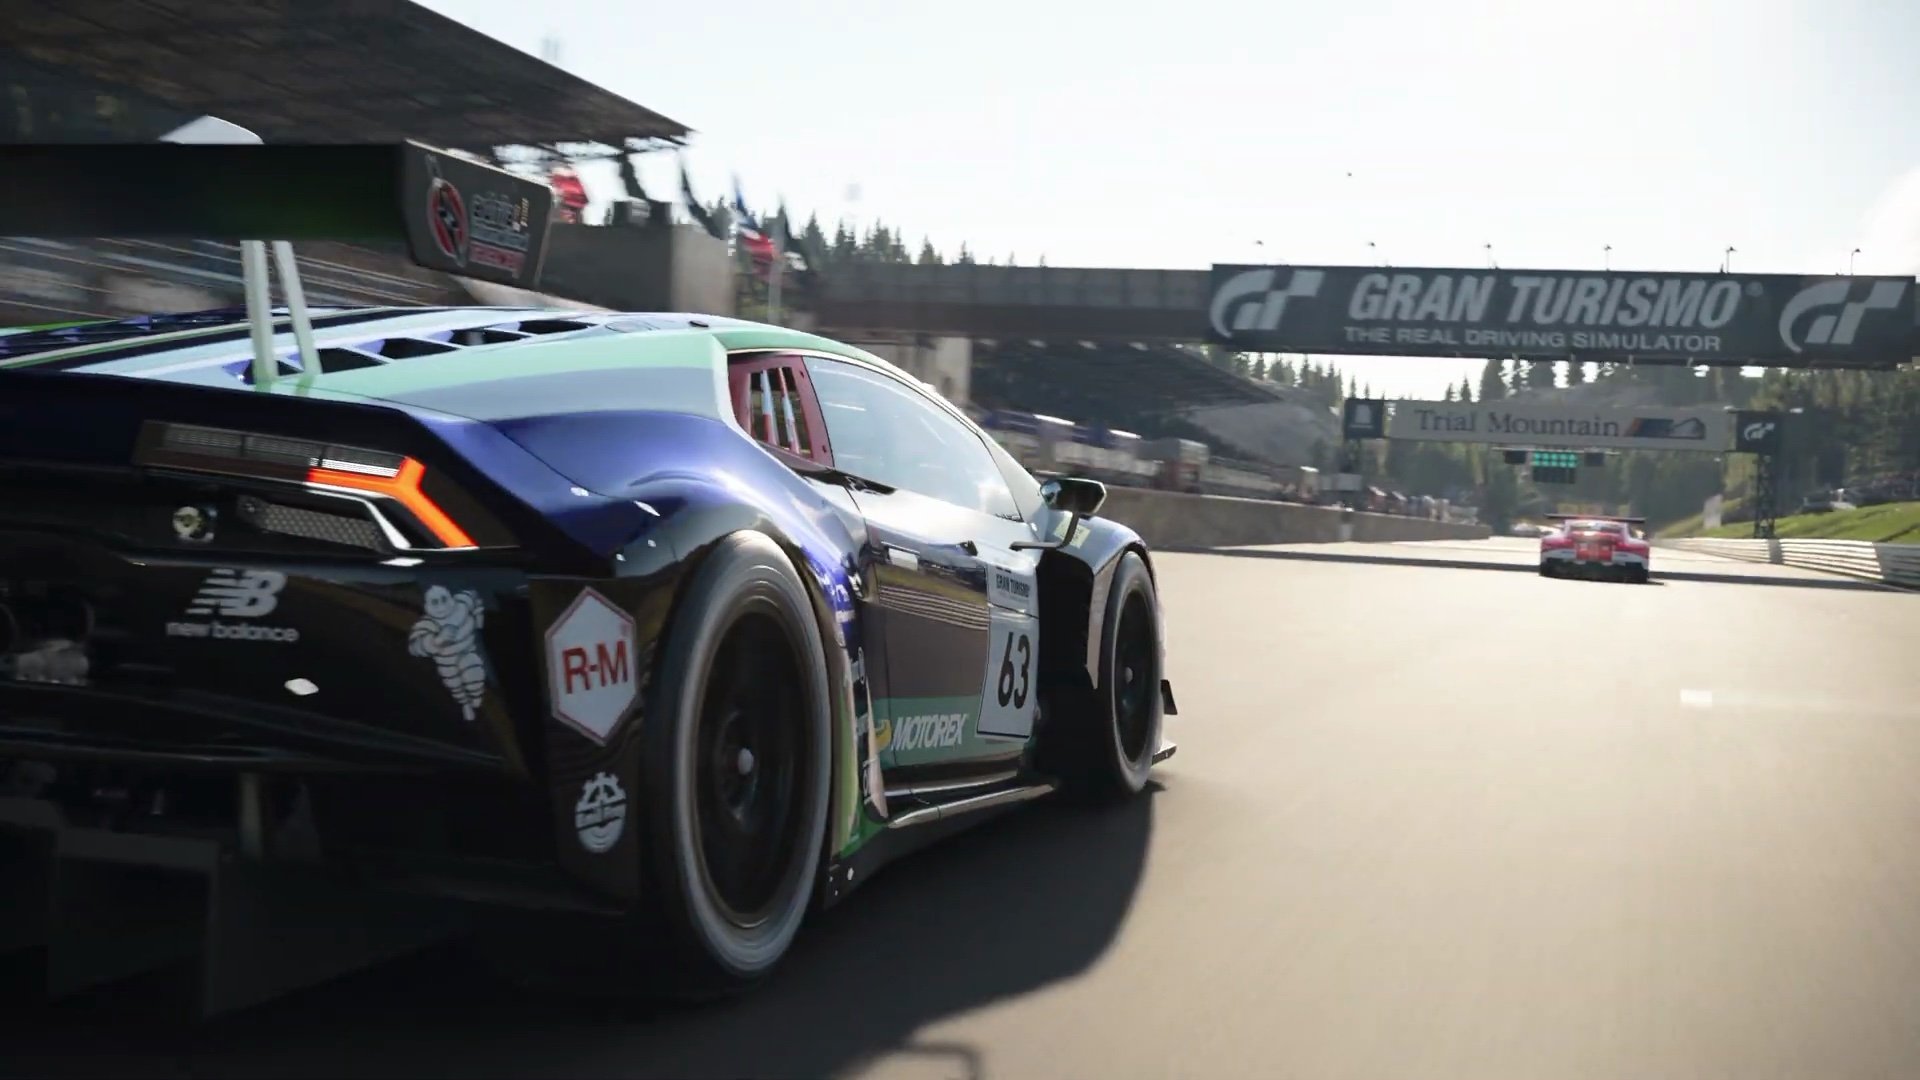 Gorgeous New 4K Gran Turismo 7 PS5 Screenshots Released